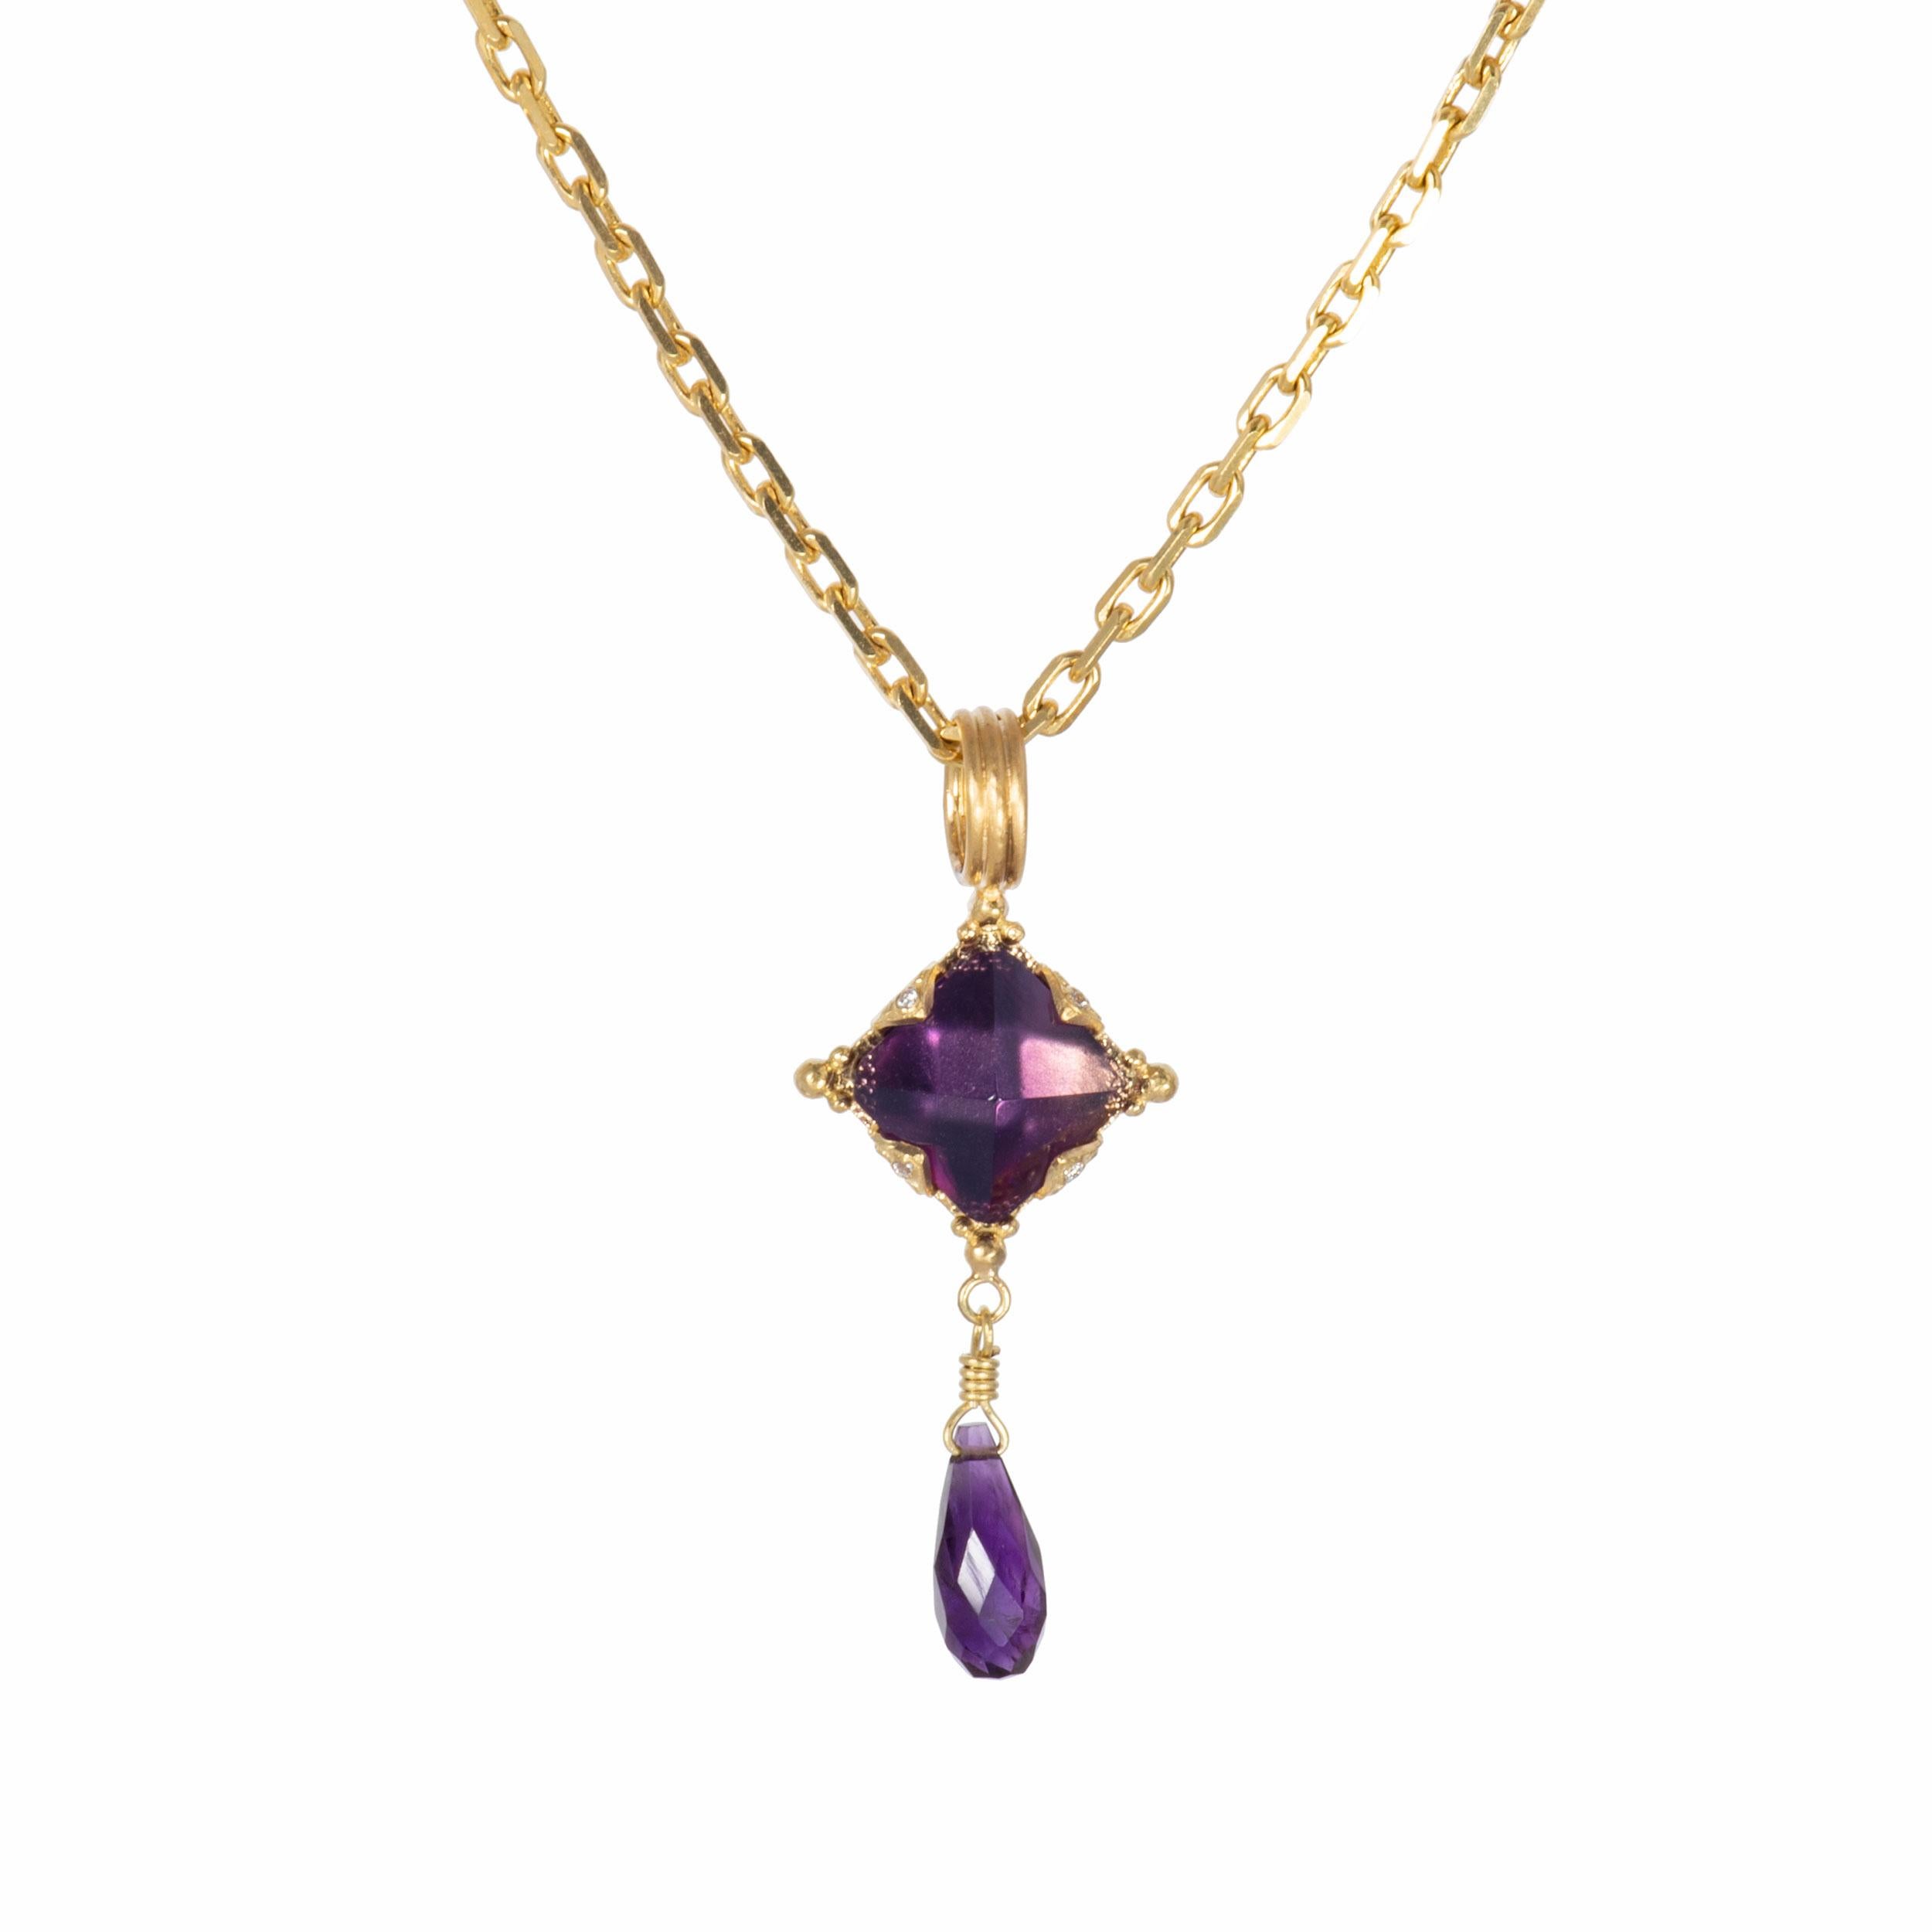 Amethyst Pyramid Pendant in 18 Karat Gold In New Condition For Sale In Santa Fe, NM